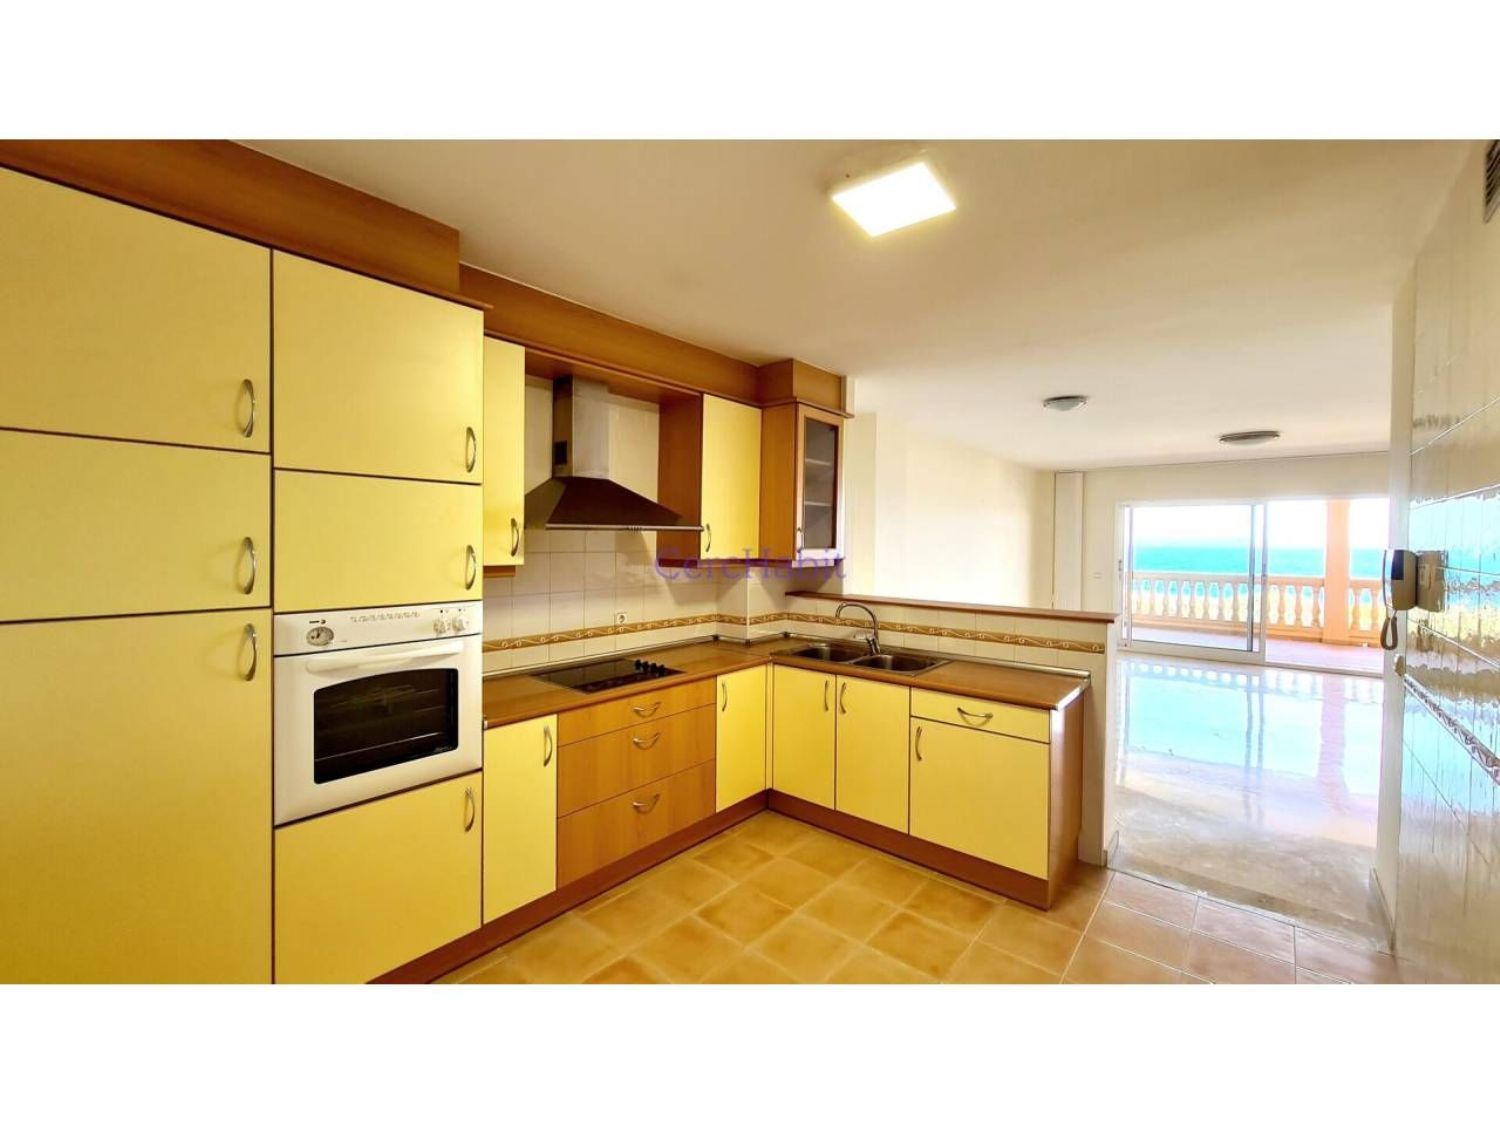 Flat for sale on the seafront in Calle del Taronger, in Llucmajor